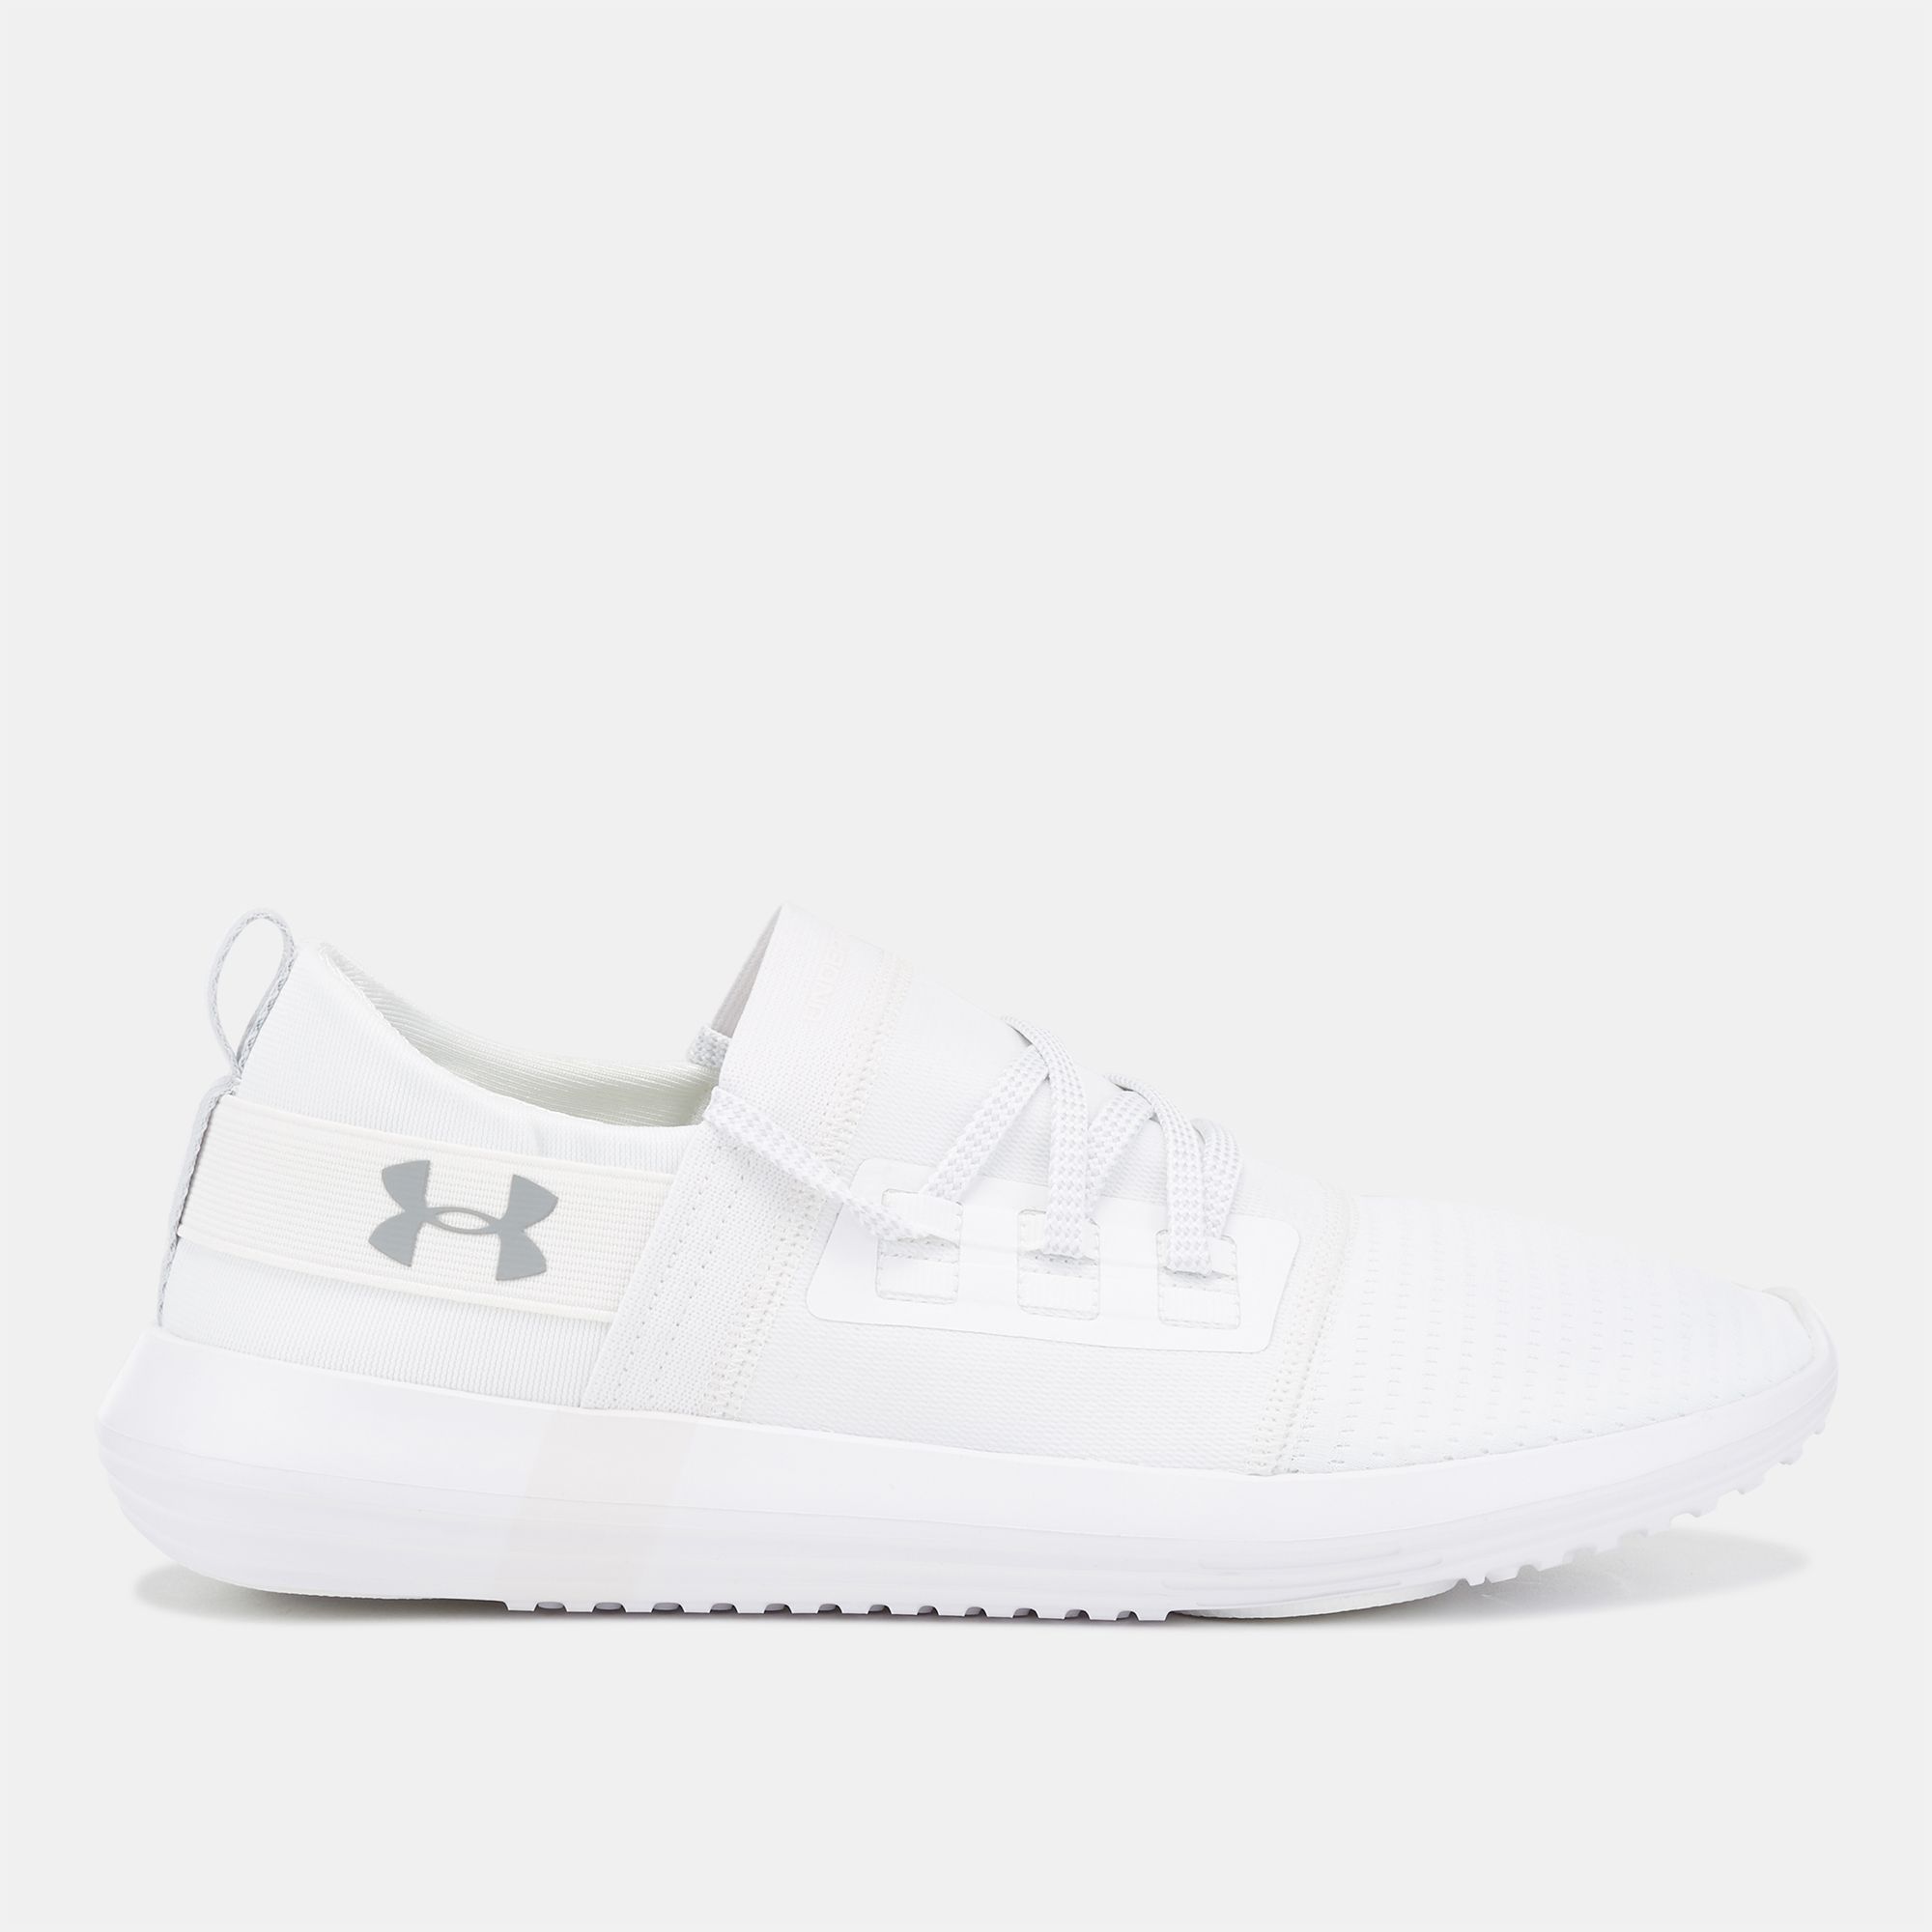 mens under armour white shoes